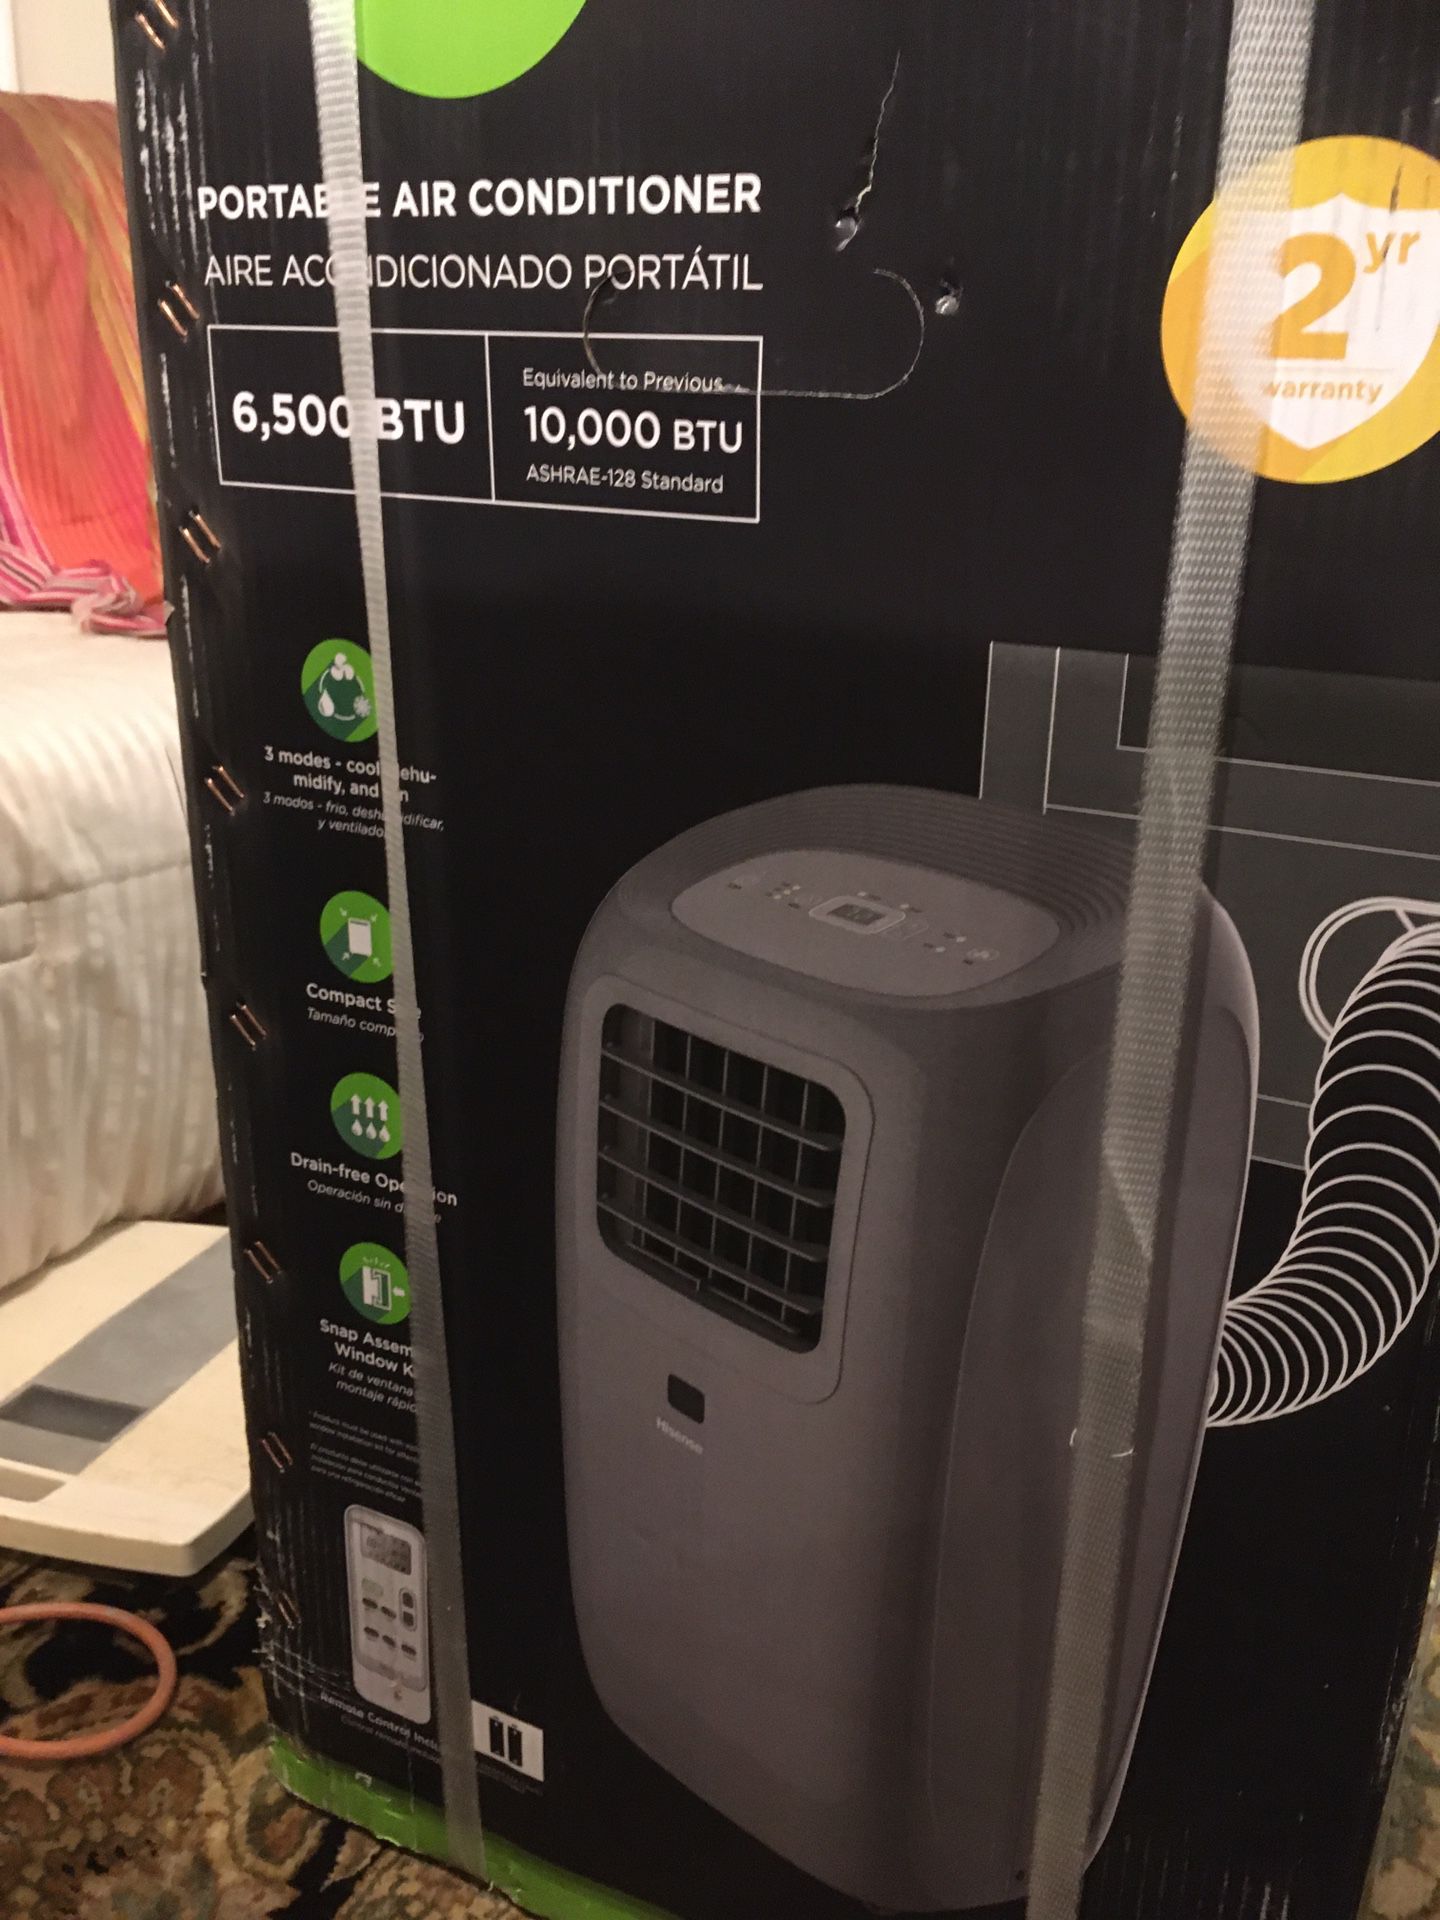 New Portable AC unit with remote control and other options